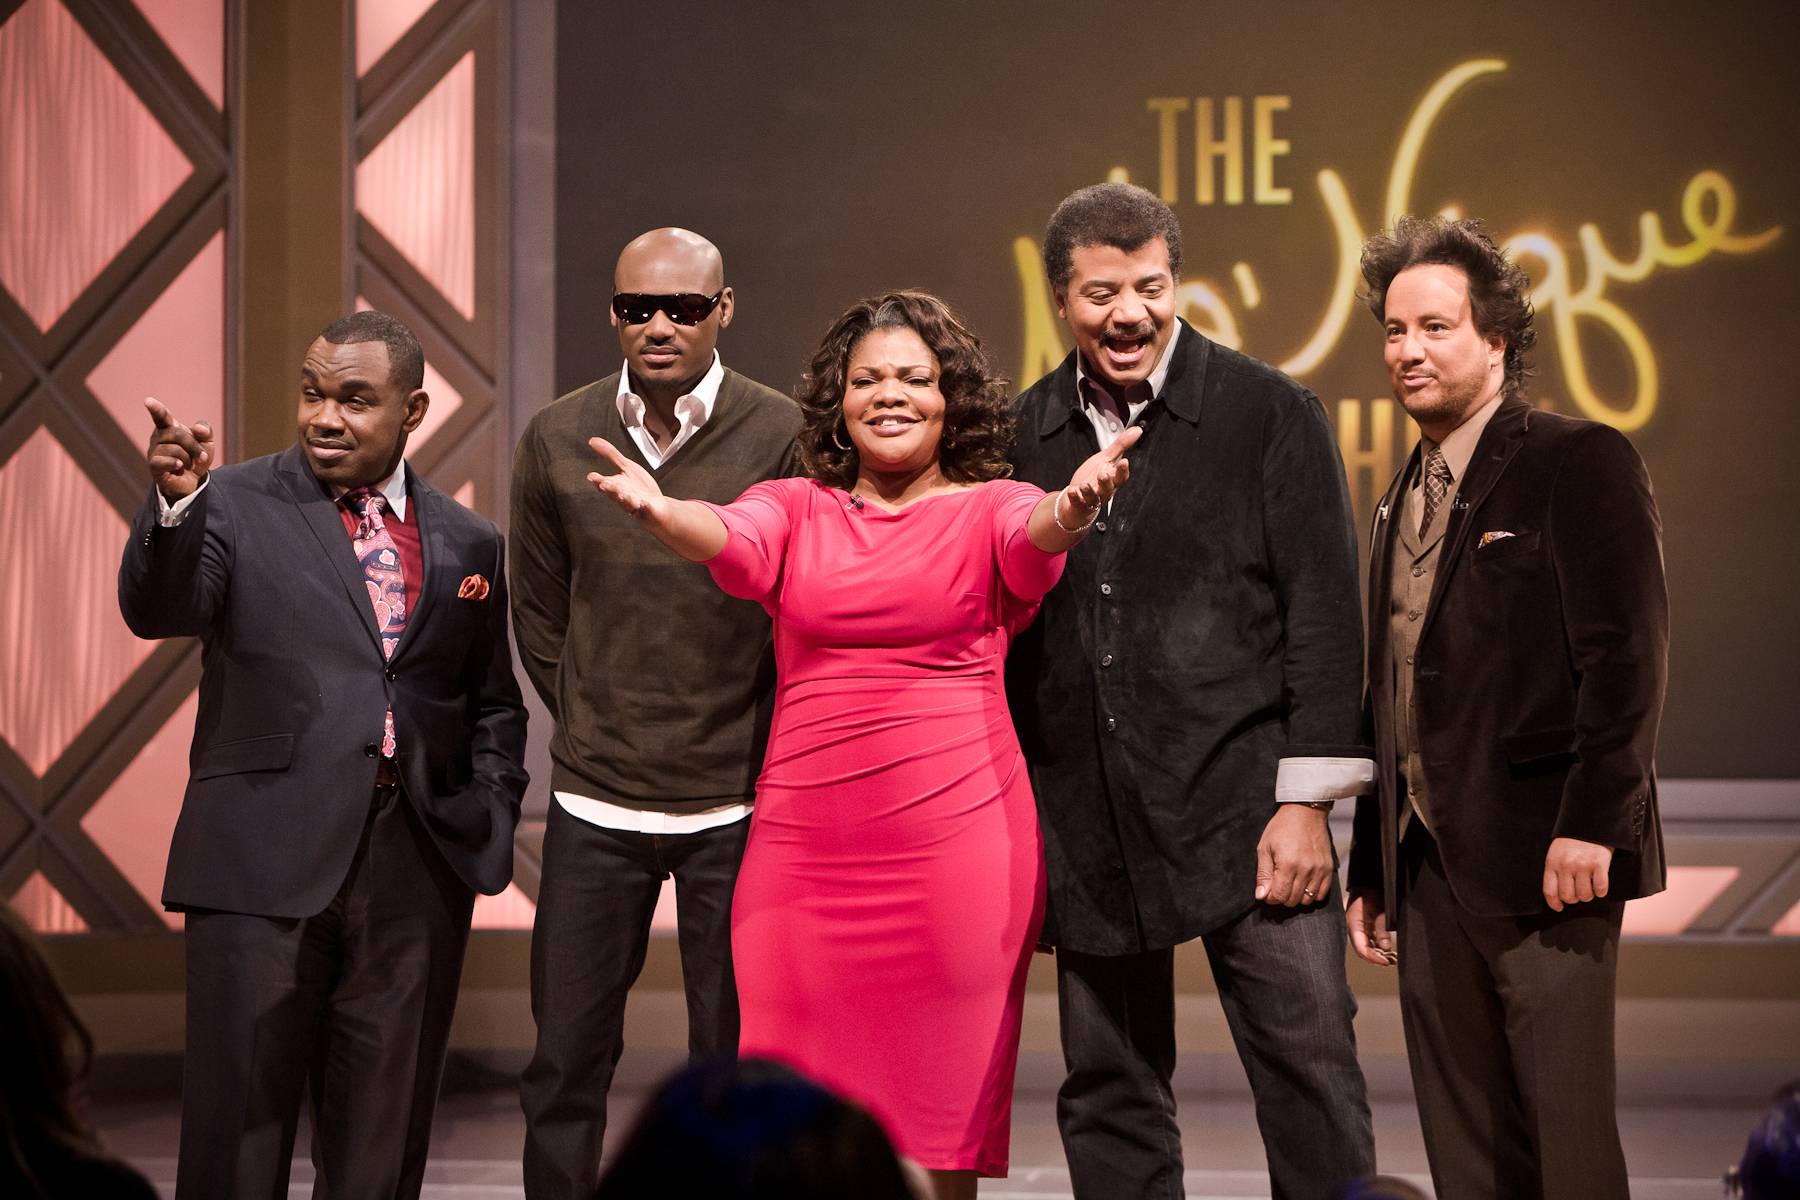 Farewell to Another Great Episode! - From left: Rodney Perry, 2face Idibia, Mo'Nique, Dr. Neil deGrasse Tyson and Giorgio Tsoukalos.(Photo: Darnell Williams/BET)